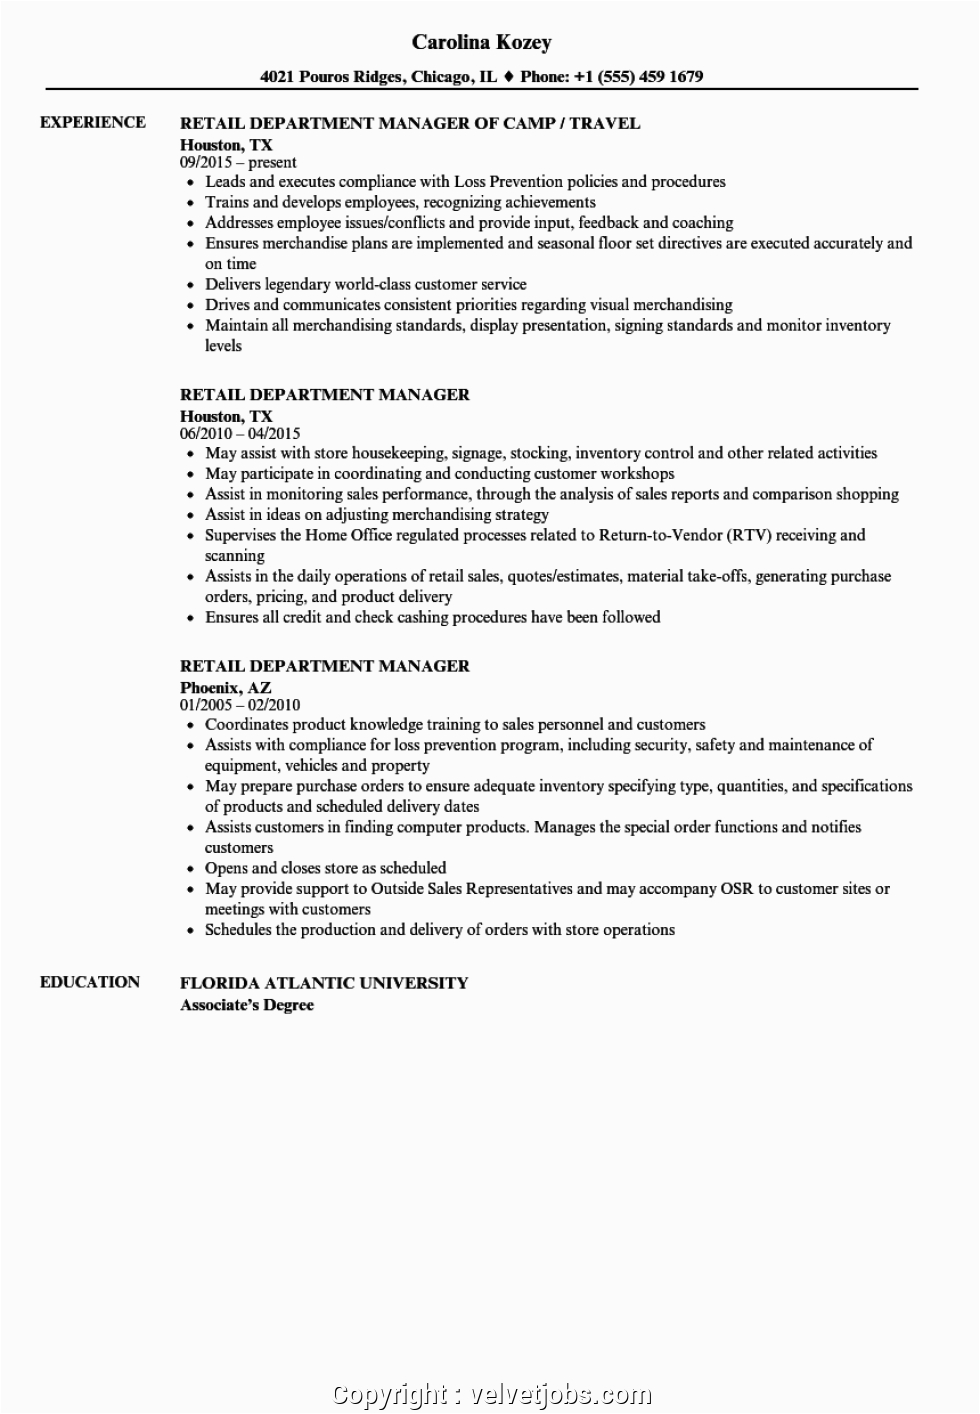 Sample Resume for Sales Lady In Department Store Executive Retail Department Manager Resume Retail